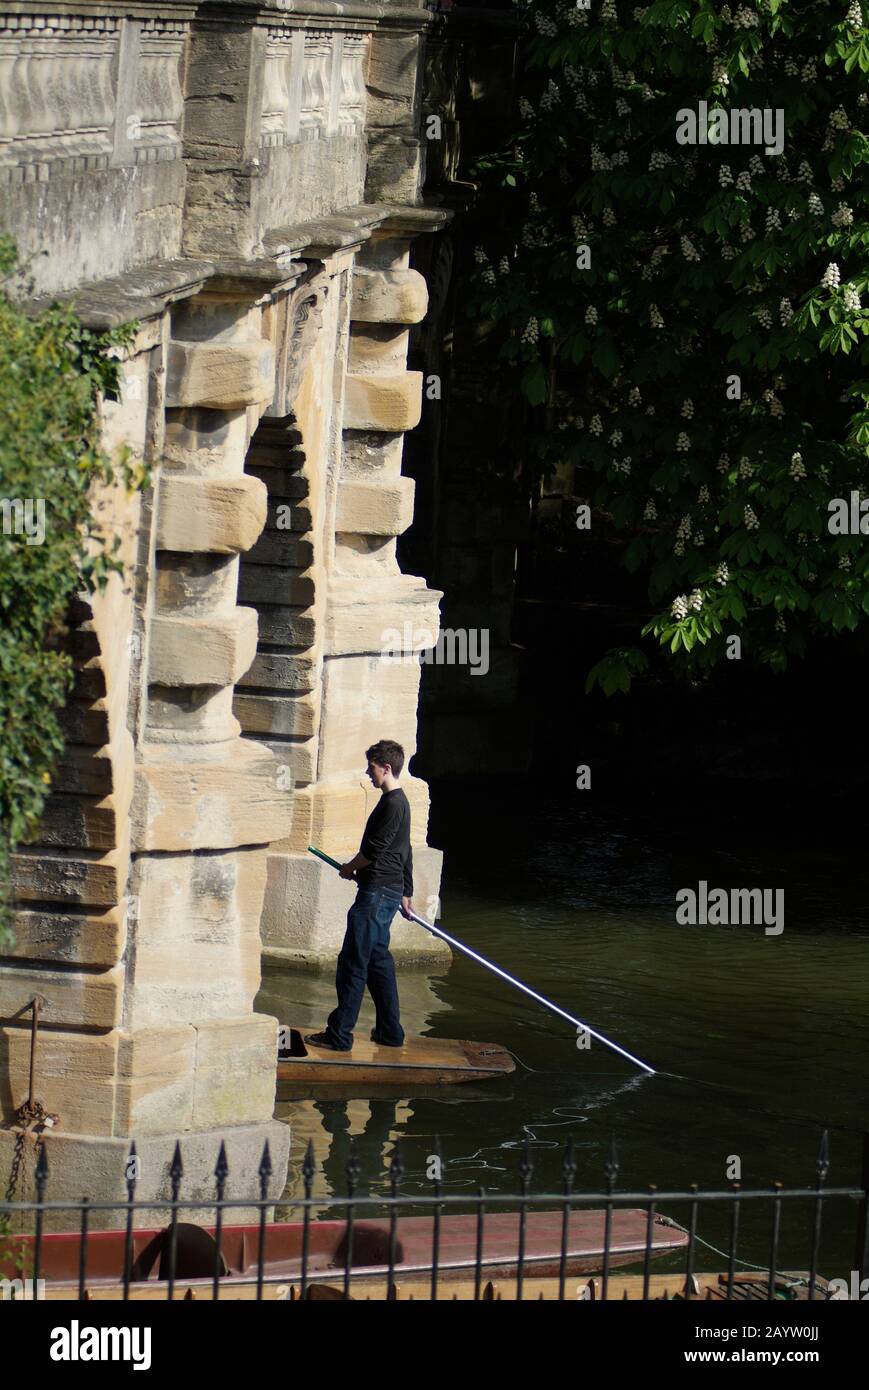 Punting on the river Cherwell at Magdalen Bridge, Oxford. Stock Photo